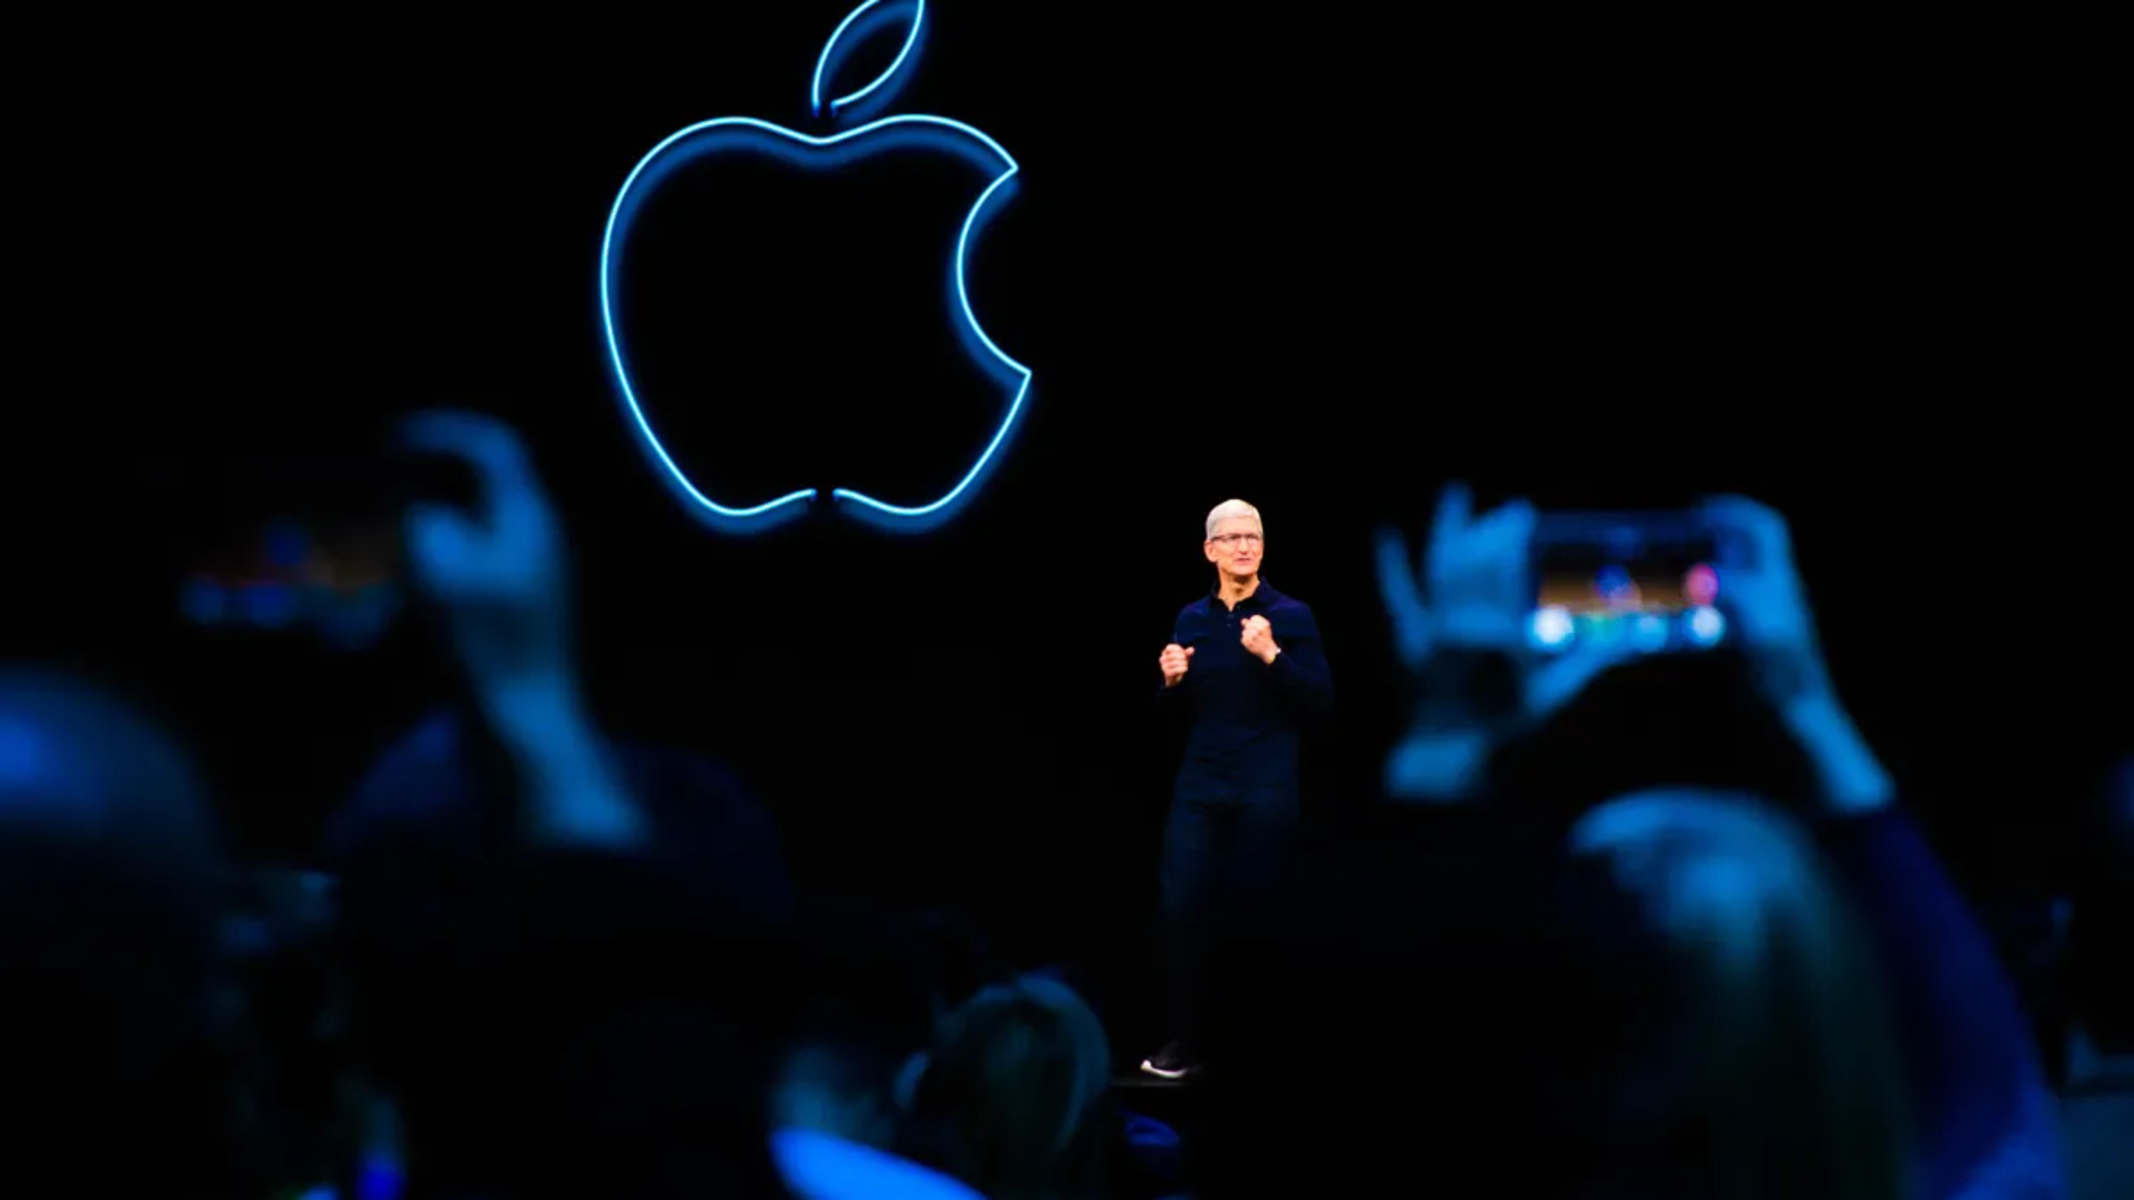 9 Facts About Apple Worldwide Developers Conference (WWDC)